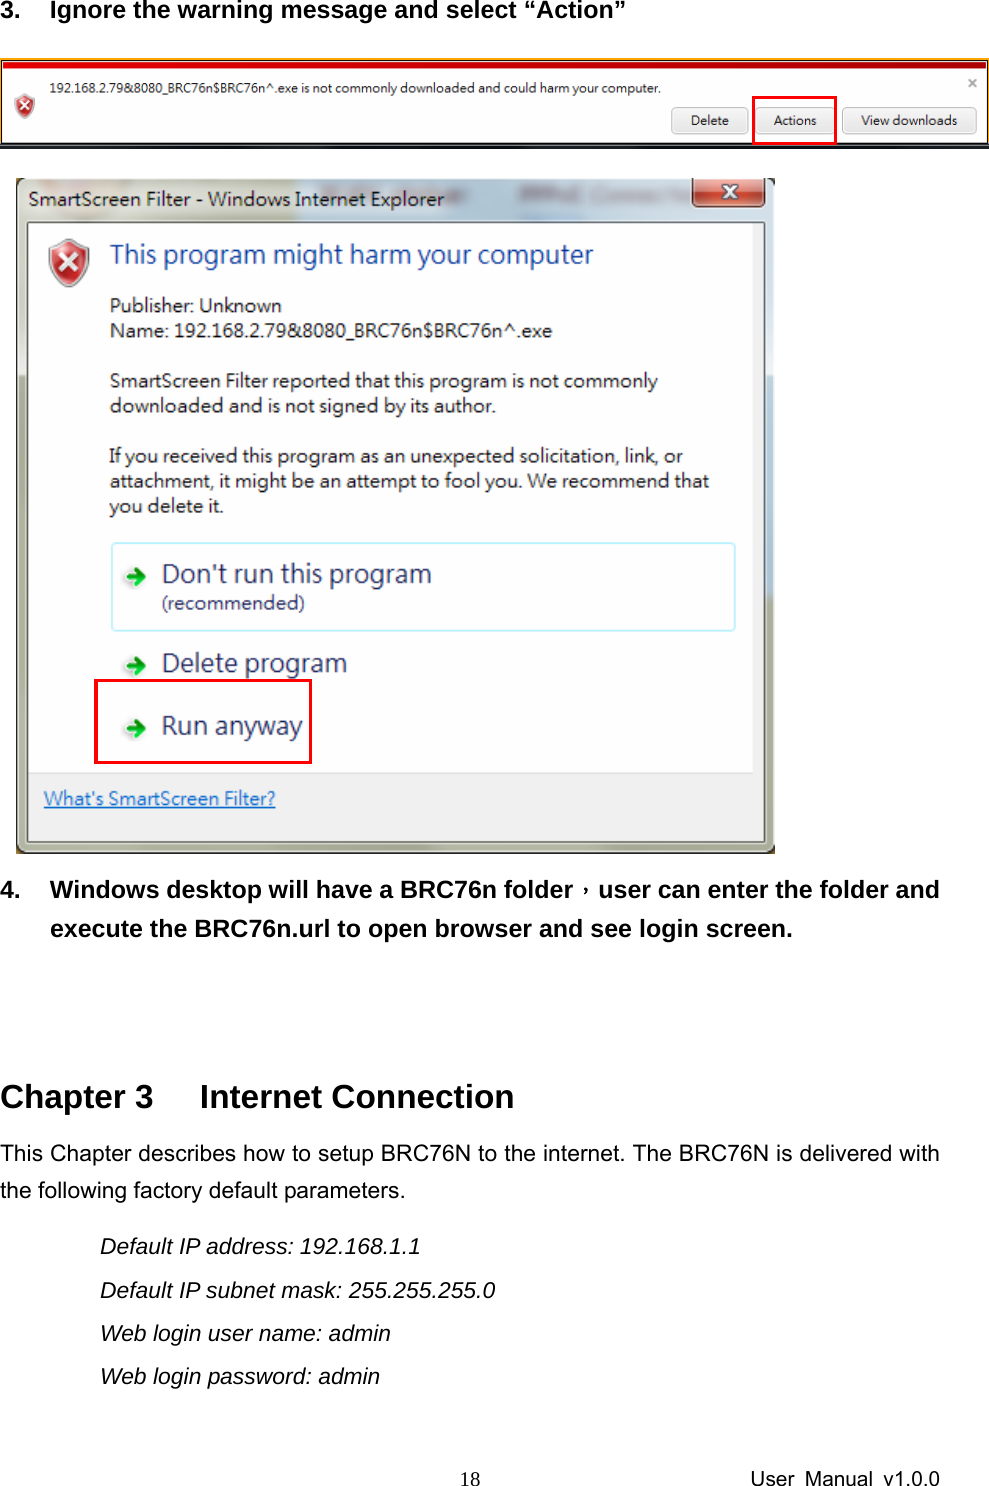                 User Manual v1.0.0 183.  Ignore the warning message and select “Action”    4.  Windows desktop will have a BRC76n folder，user can enter the folder and execute the BRC76n.url to open browser and see login screen.   Chapter 3  Internet Connection This Chapter describes how to setup BRC76N to the internet. The BRC76N is delivered with the following factory default parameters. Default IP address: 192.168.1.1   Default IP subnet mask: 255.255.255.0 Web login user name: admin Web login password: admin  